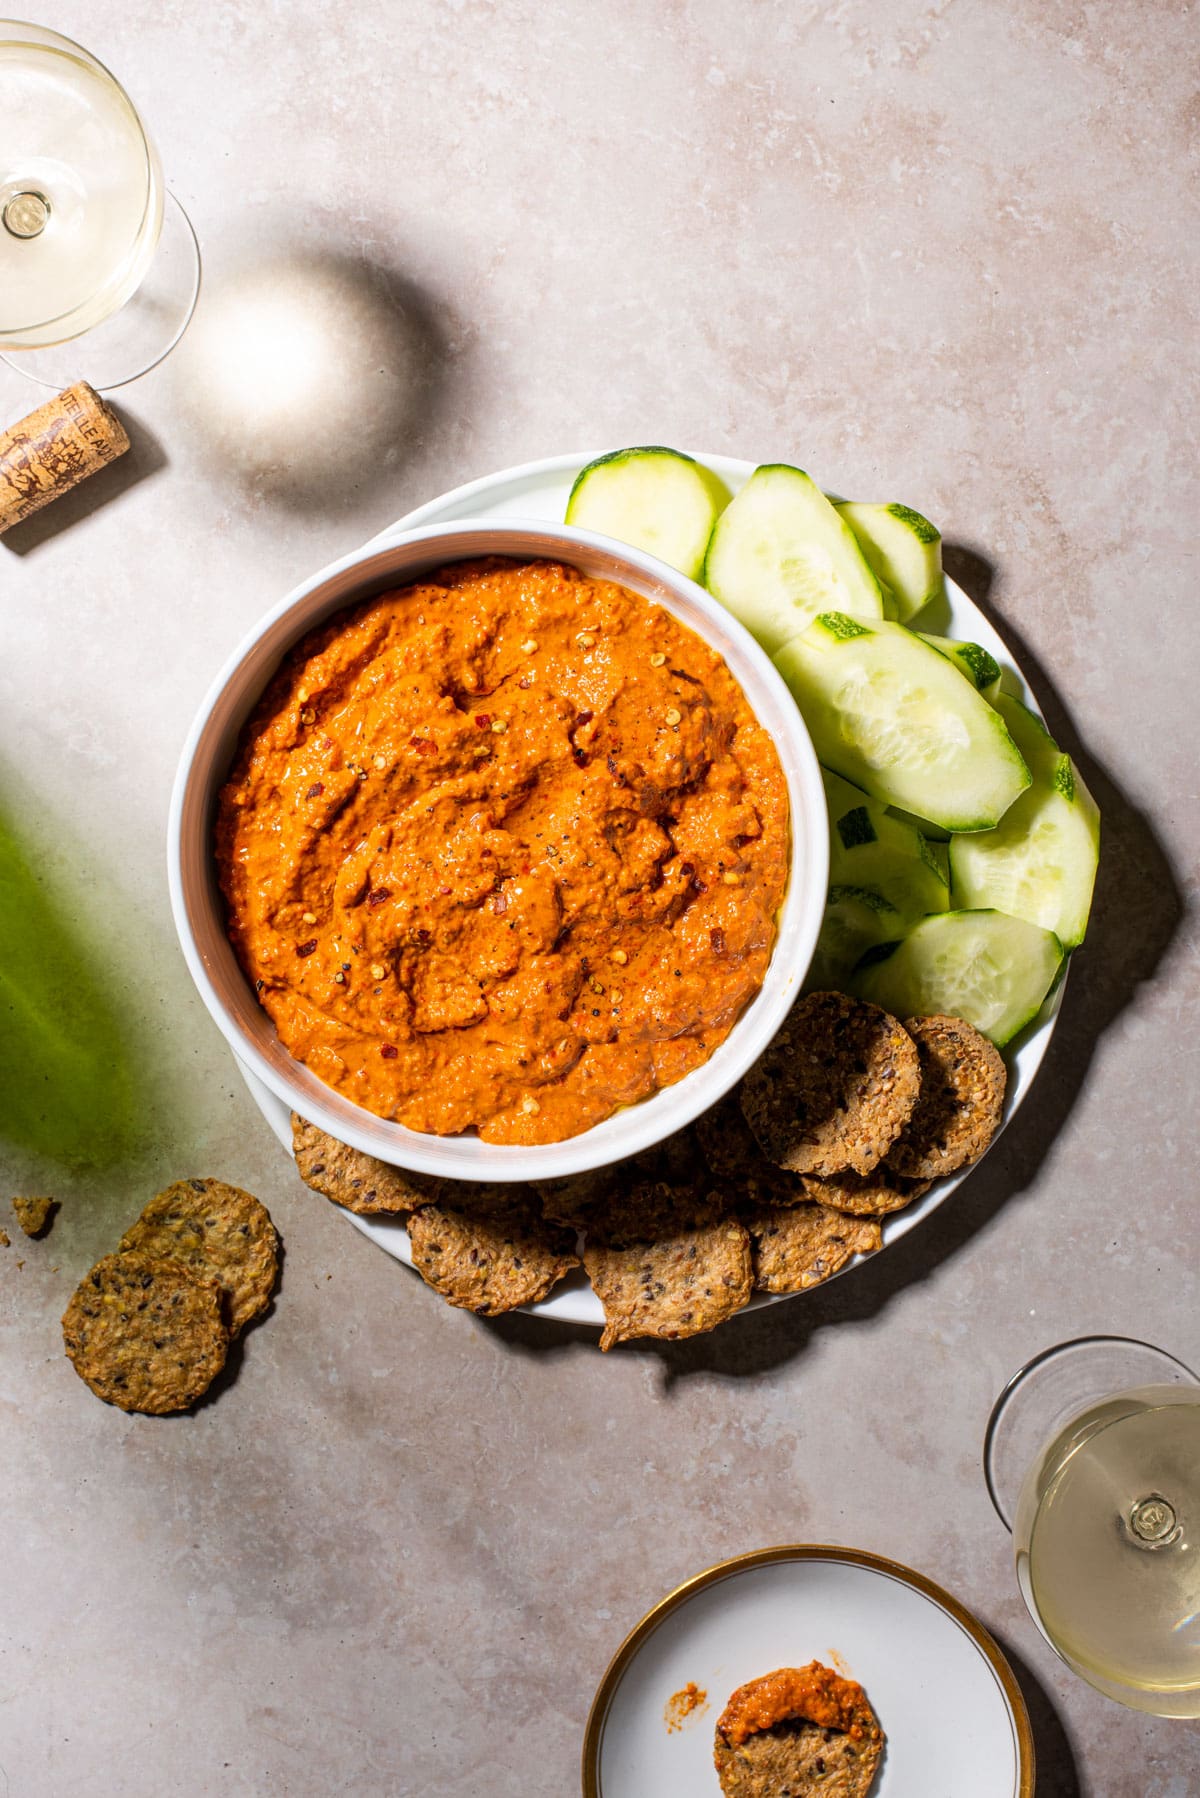 Muhammara recipe dip in a white bowl next to cucumbers, crackers, and wine glasses.